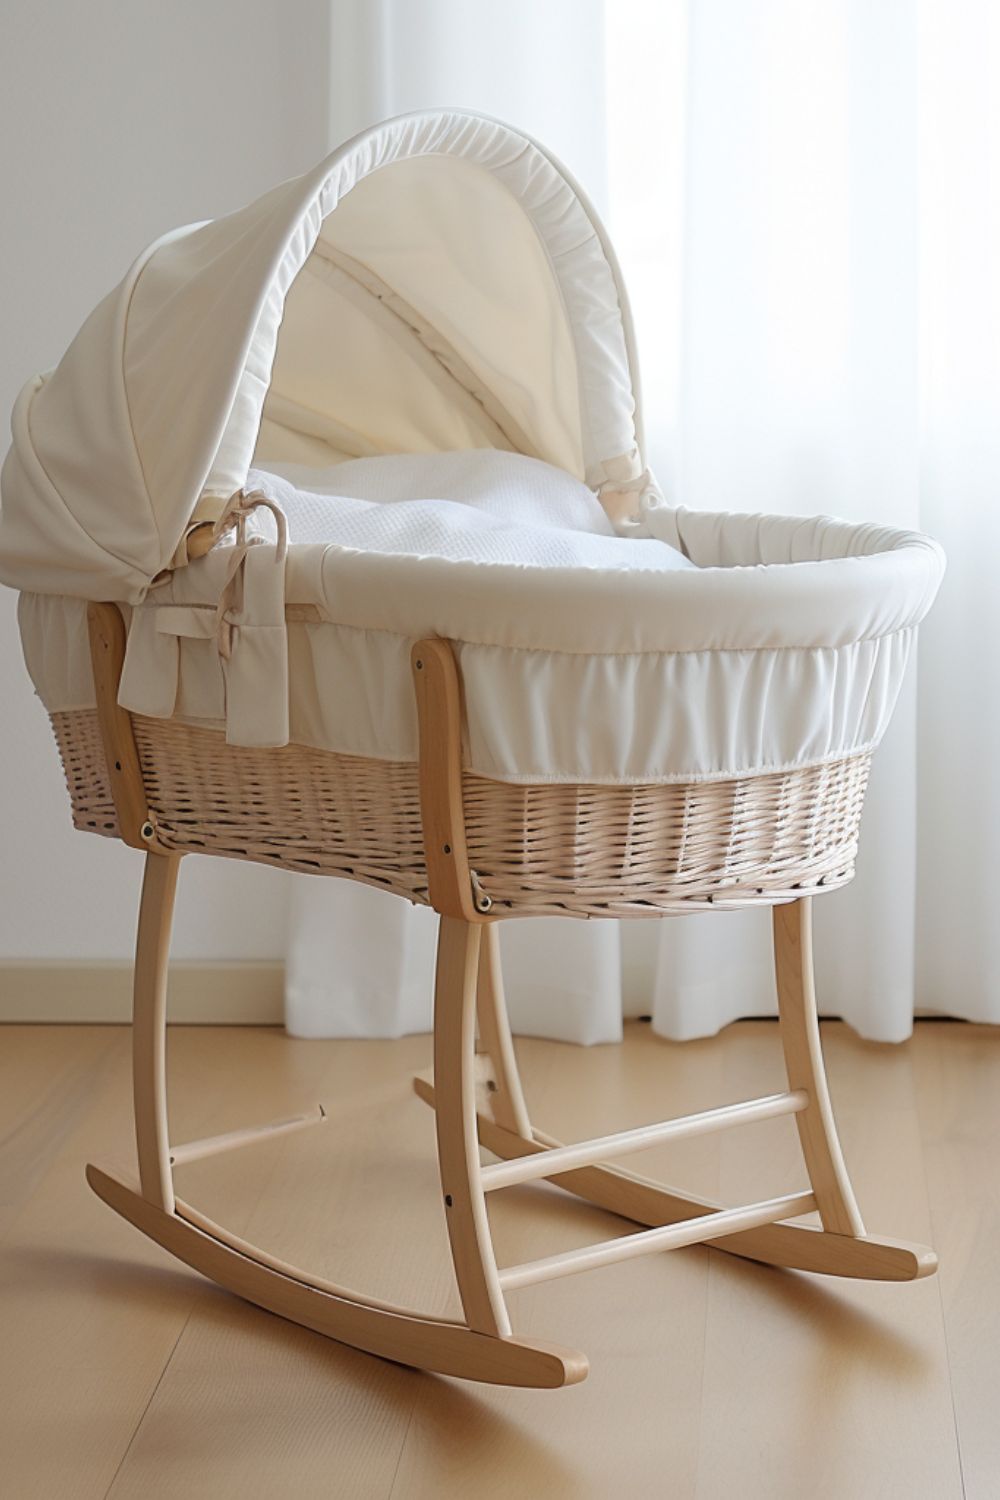 How to Clean Bassinet